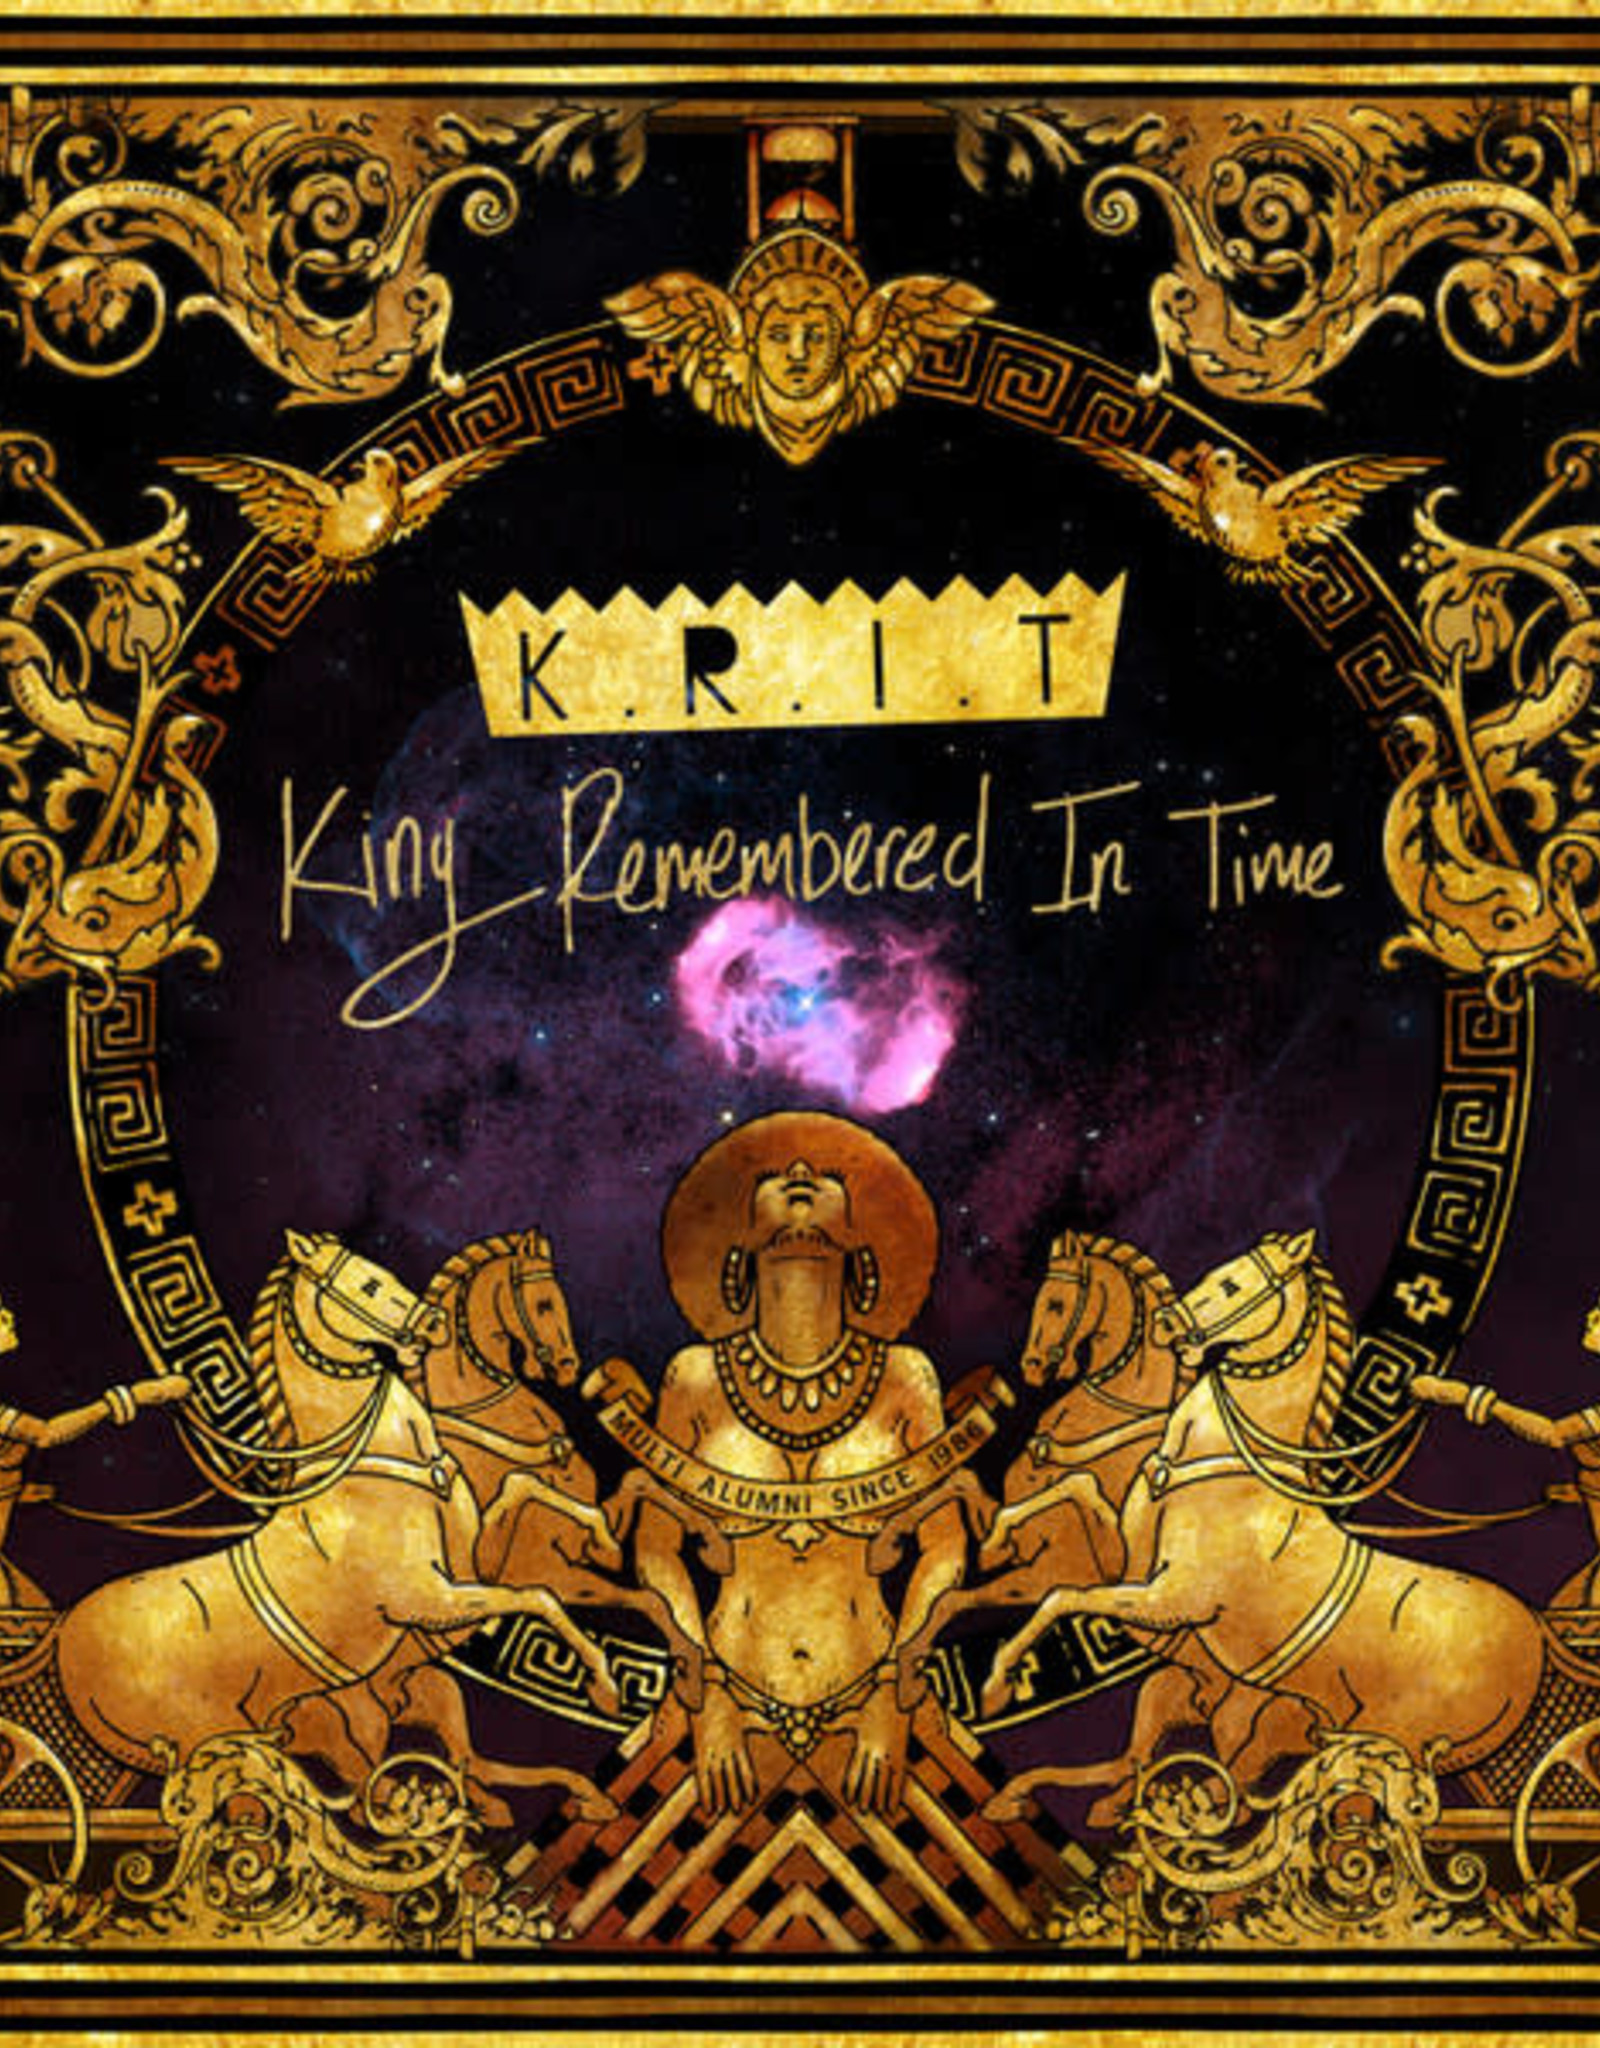 Big K.R.I.T. - King Remembered In Time (Limited Edition)